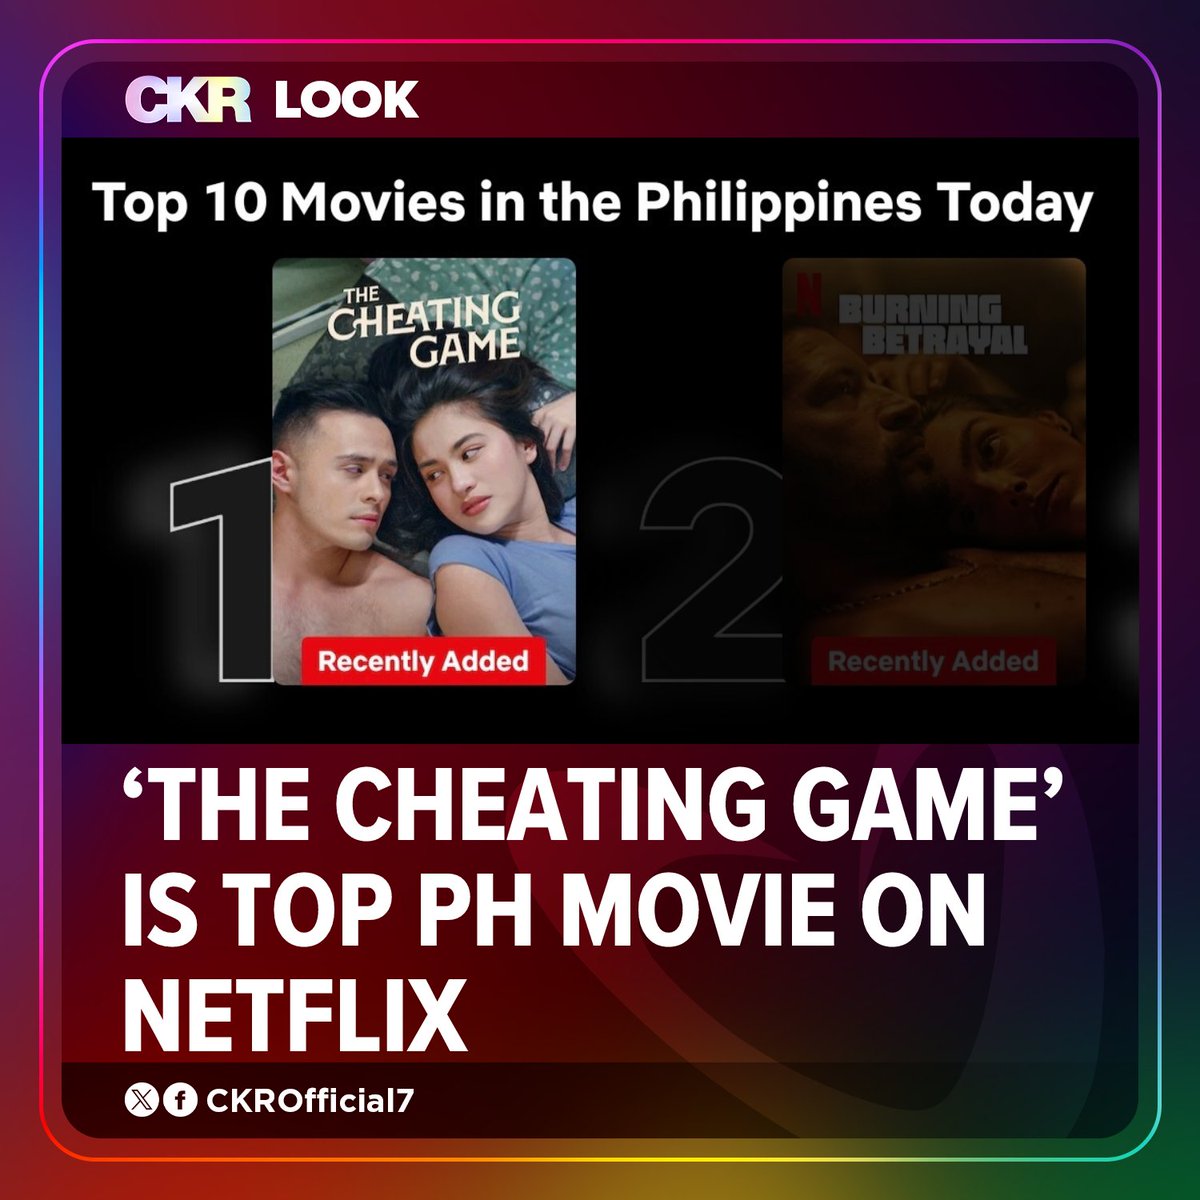 LOOK: GMA Public Affairs' film 'The Cheating Game' starring Julie Anne San Jose (@MyJaps), Rayver Cruz (@RAYVERCRUZ20), Martin Del Rosario (@mart_drosario), Winwyn Marquez (@wynmarquez), and Thea Tolentino (@TheaTolentino13) is currently the top Philippine movie on the streaming…